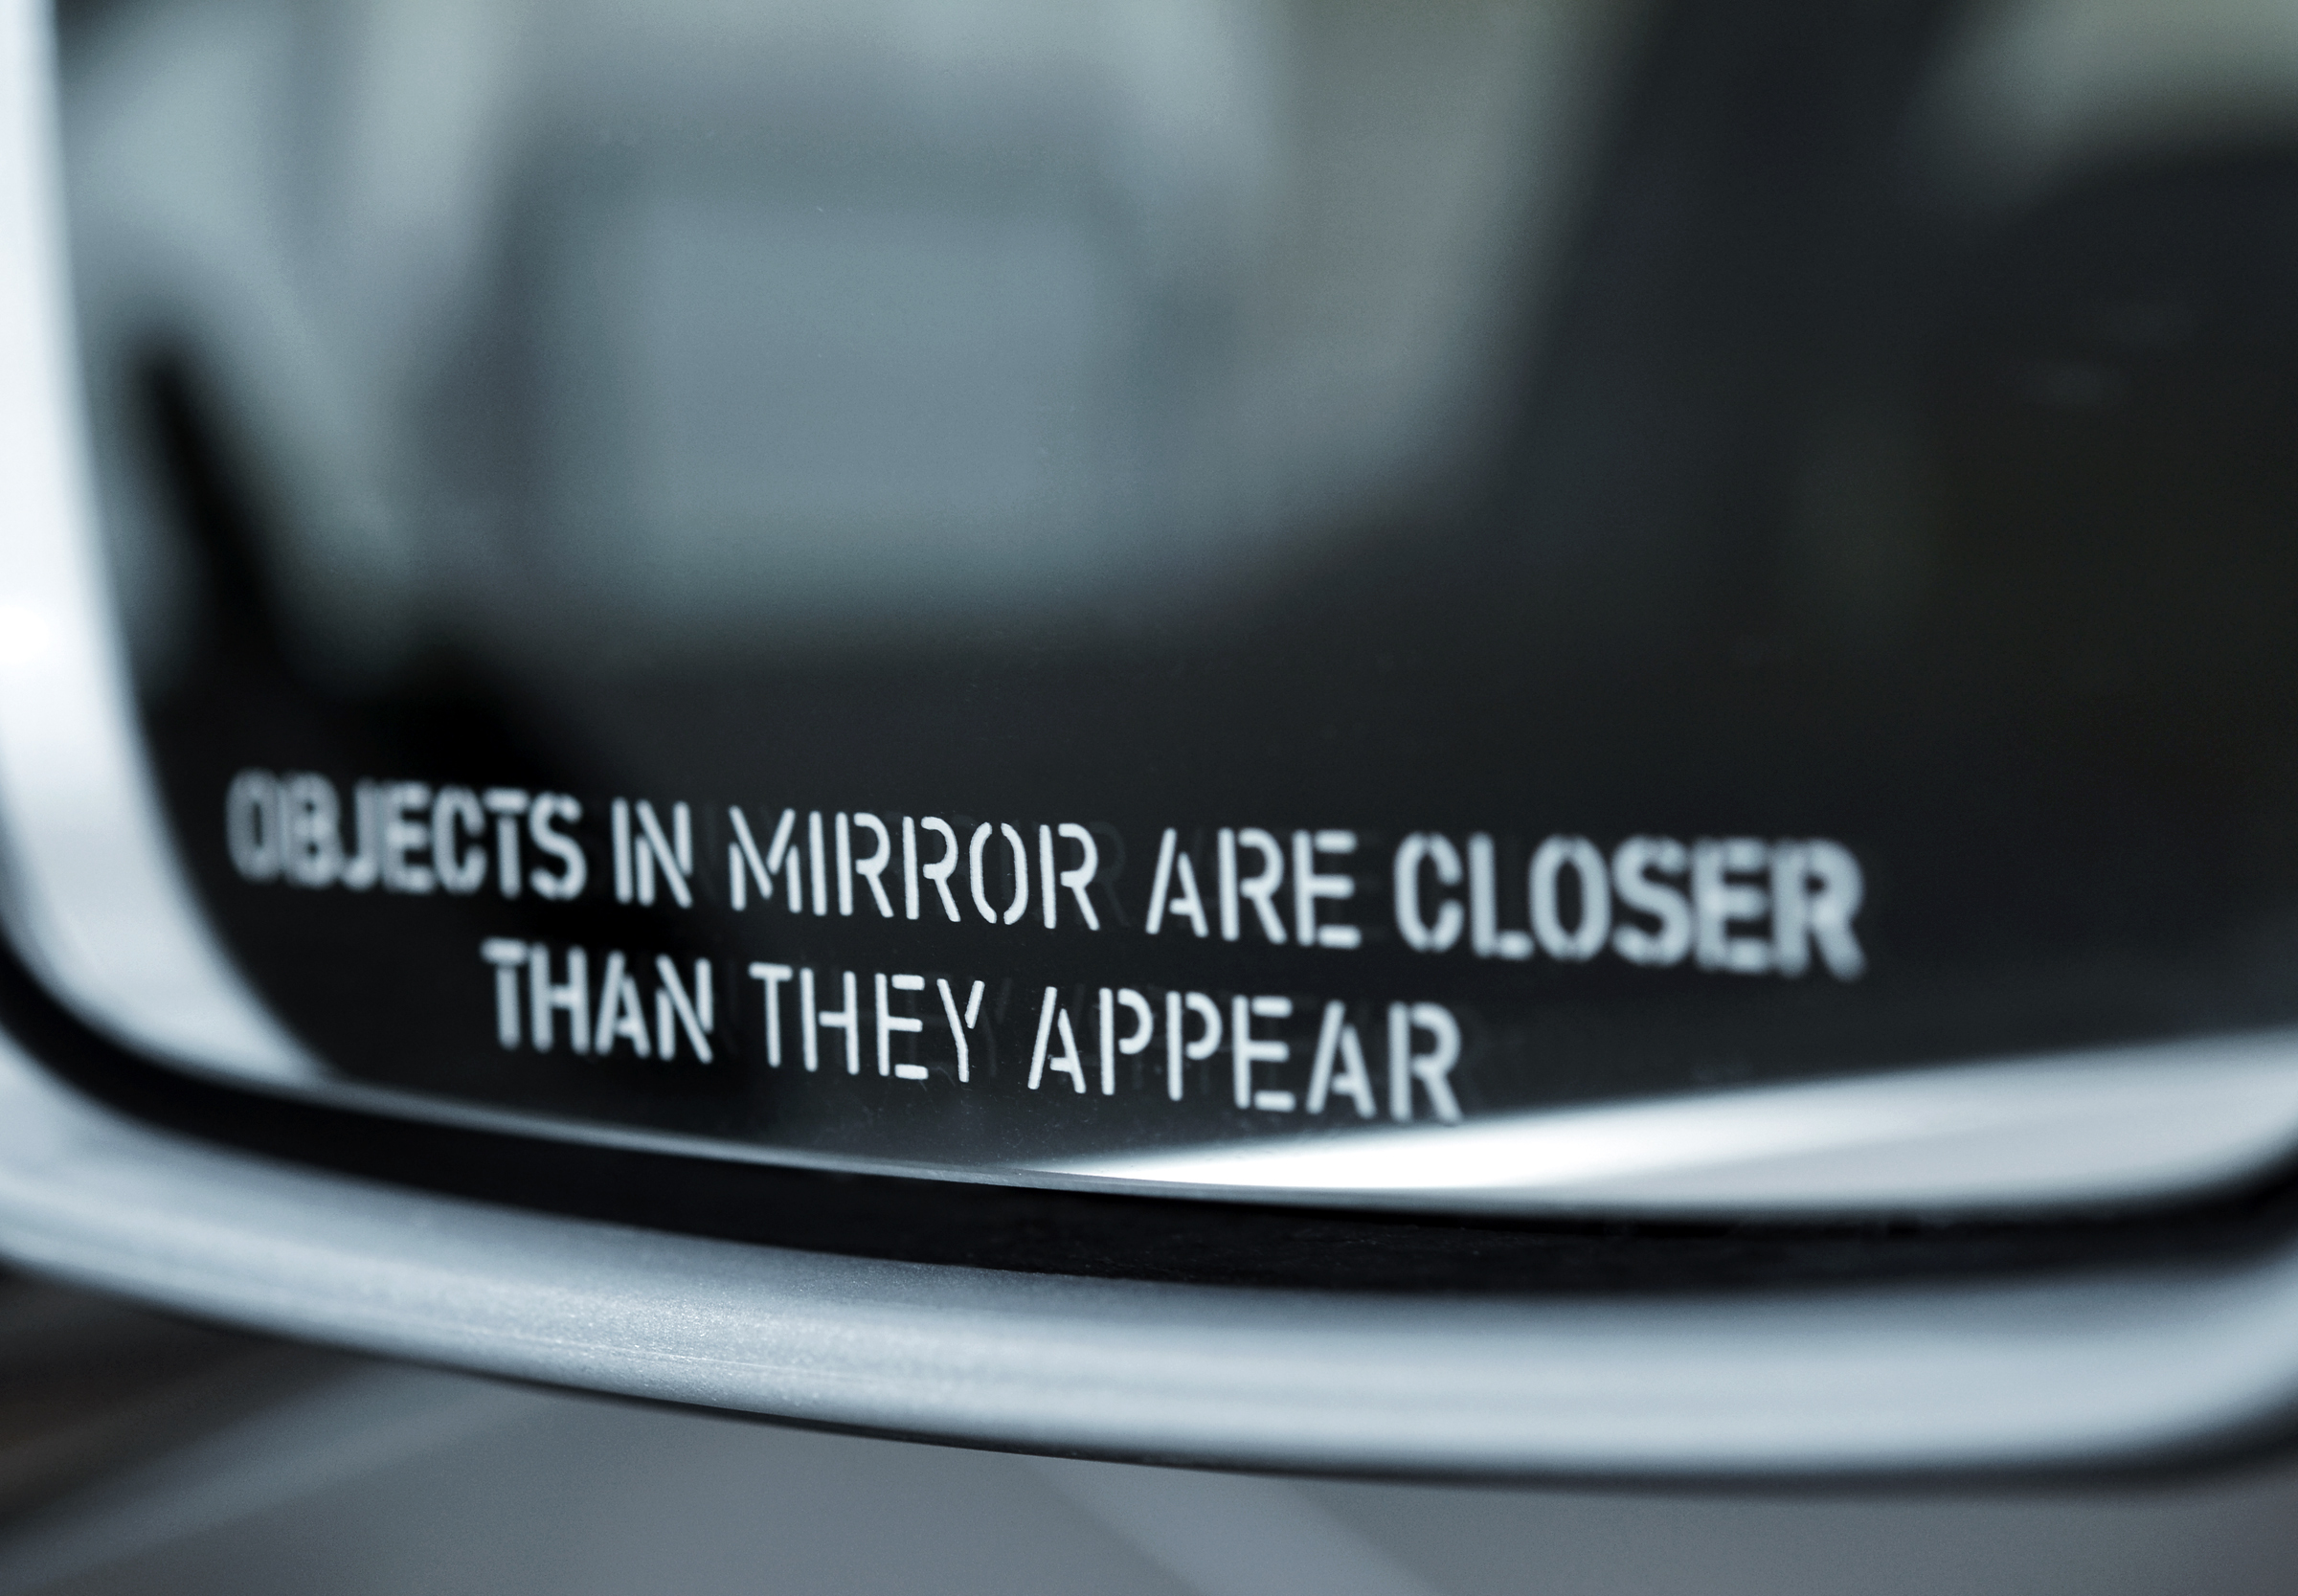 Object mirror. Машина objects in Mirror are closer than they appear. Objects in Mirror are closer than they appear картинка. Objects in Mirror. Objects in Mirror are closer than they appear перевод.